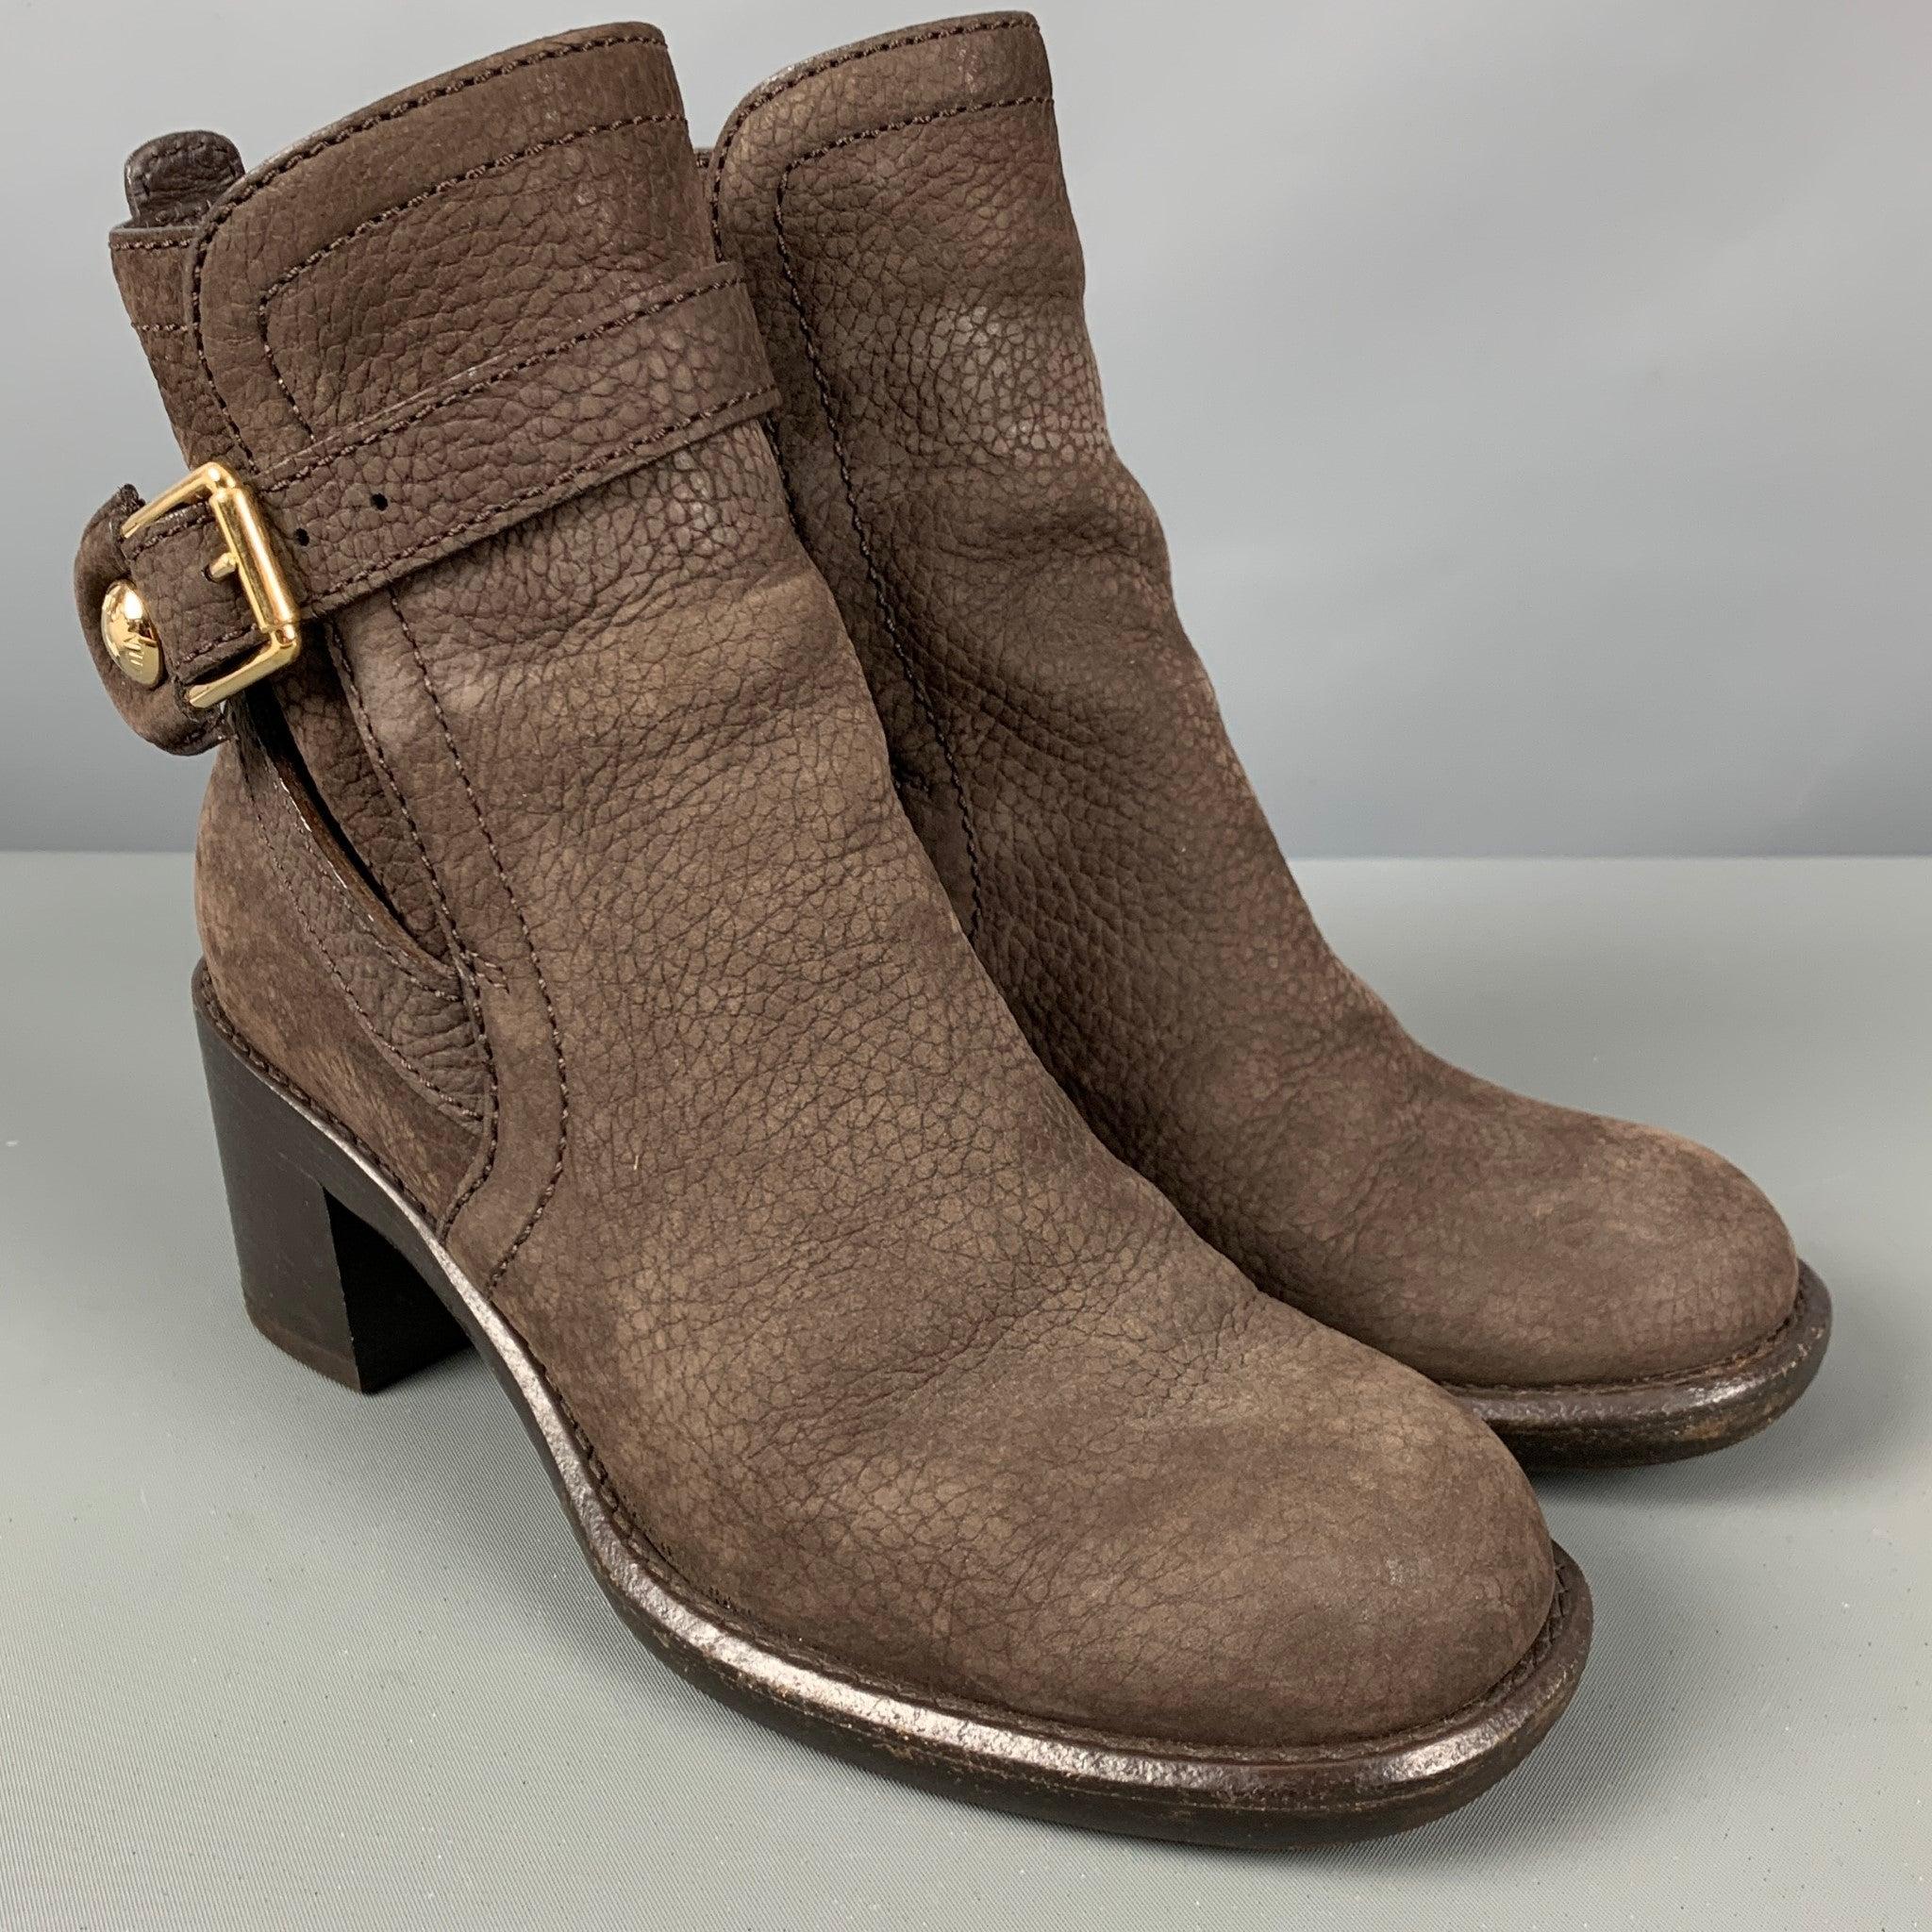 LOUIS VUITTON boots in a brown leather featuring a pebble grain texture, gold tone hardware, chunky heel, and a wooden sole. Comes with box. Made in Italy.Very Good Pre-Owned Condition. 

Marked:   IT 36.5 

Measurements: 
  Length: 9.5 inches